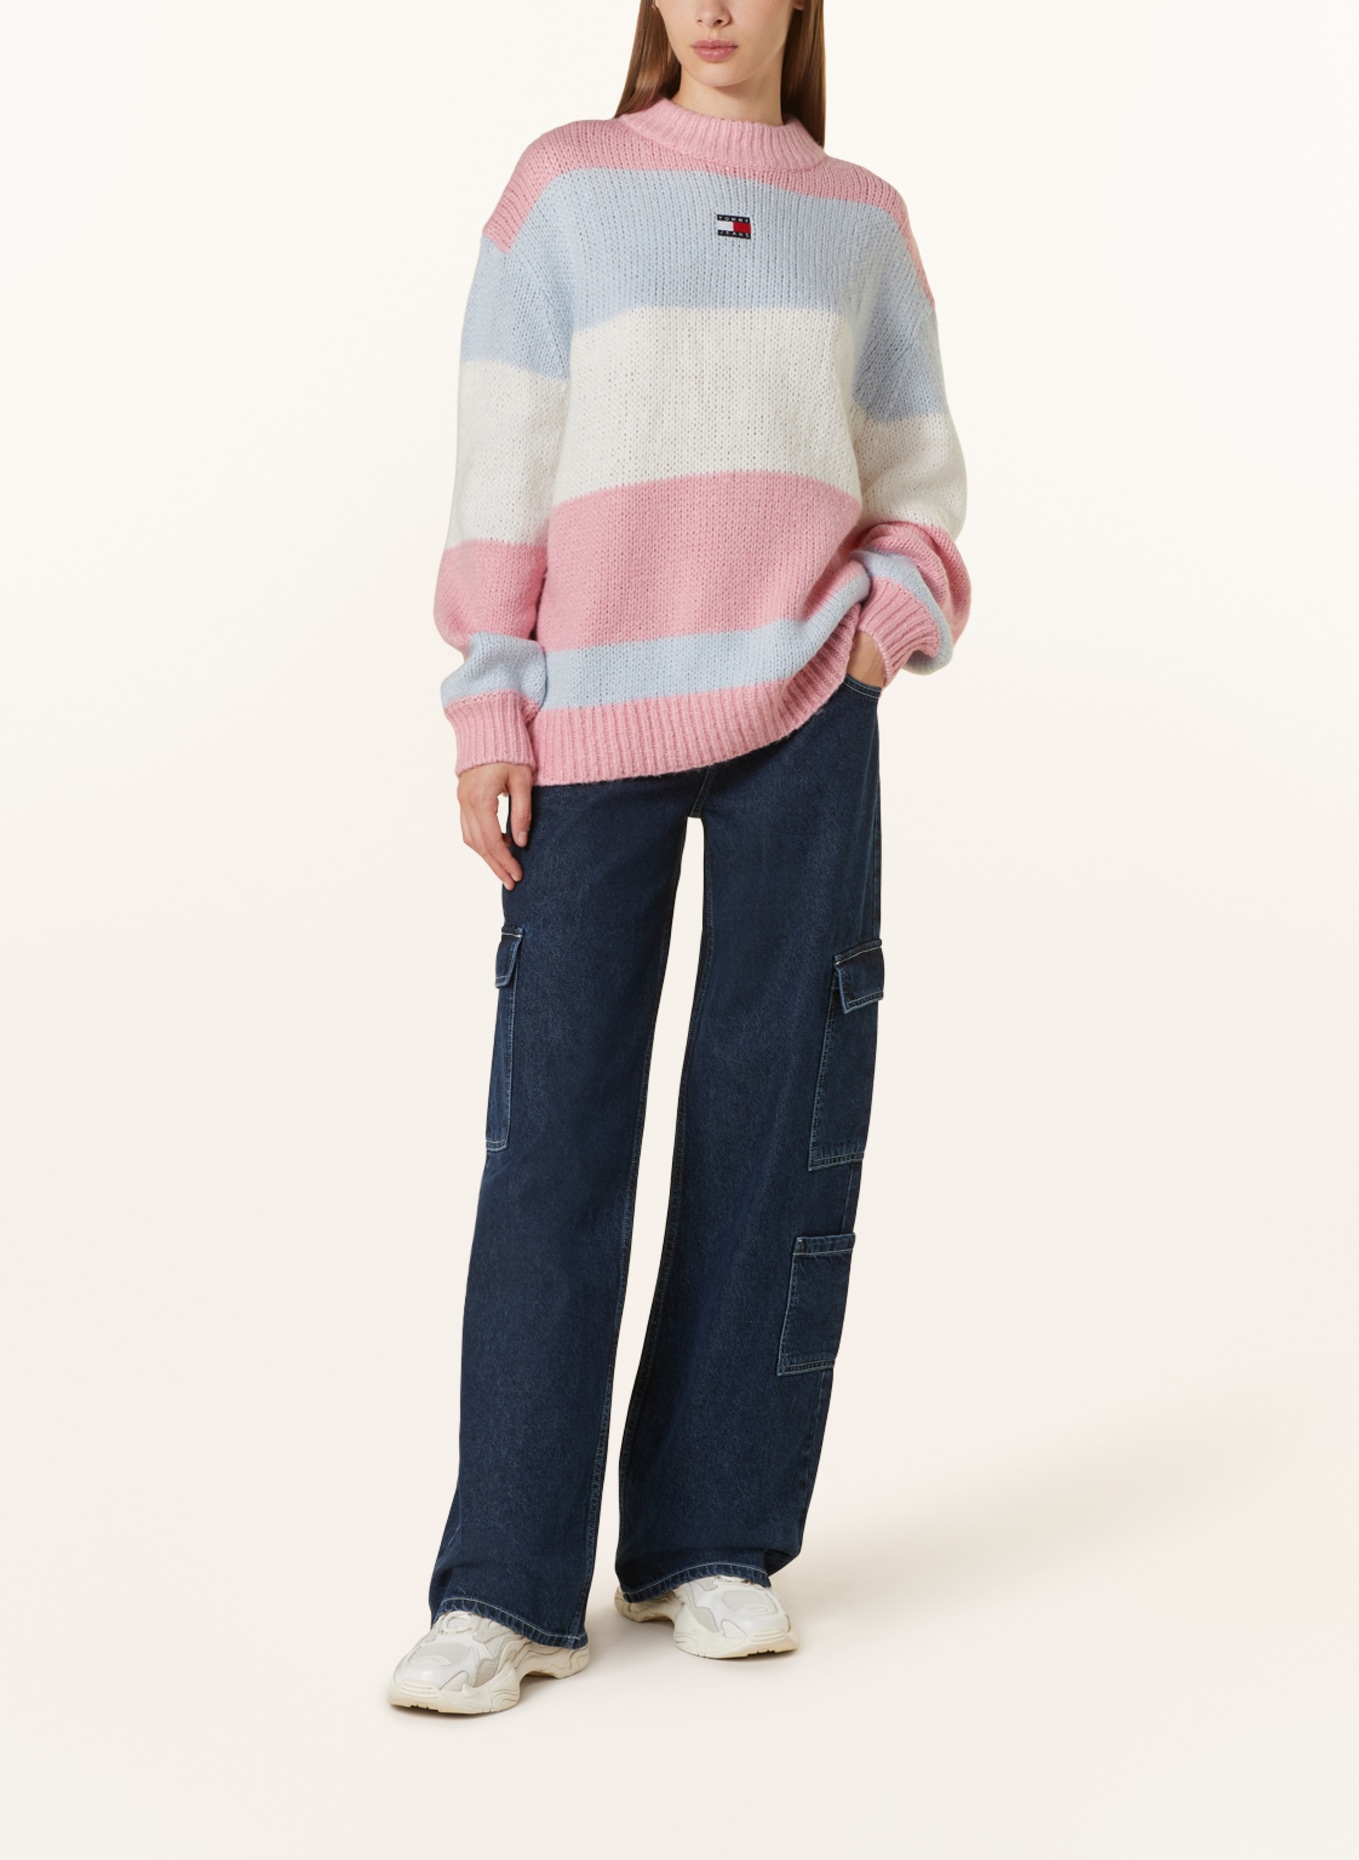 TOMMY JEANS Pullover, Farbe: ROSA/ HELLBLAU/ WEISS (Bild 2)